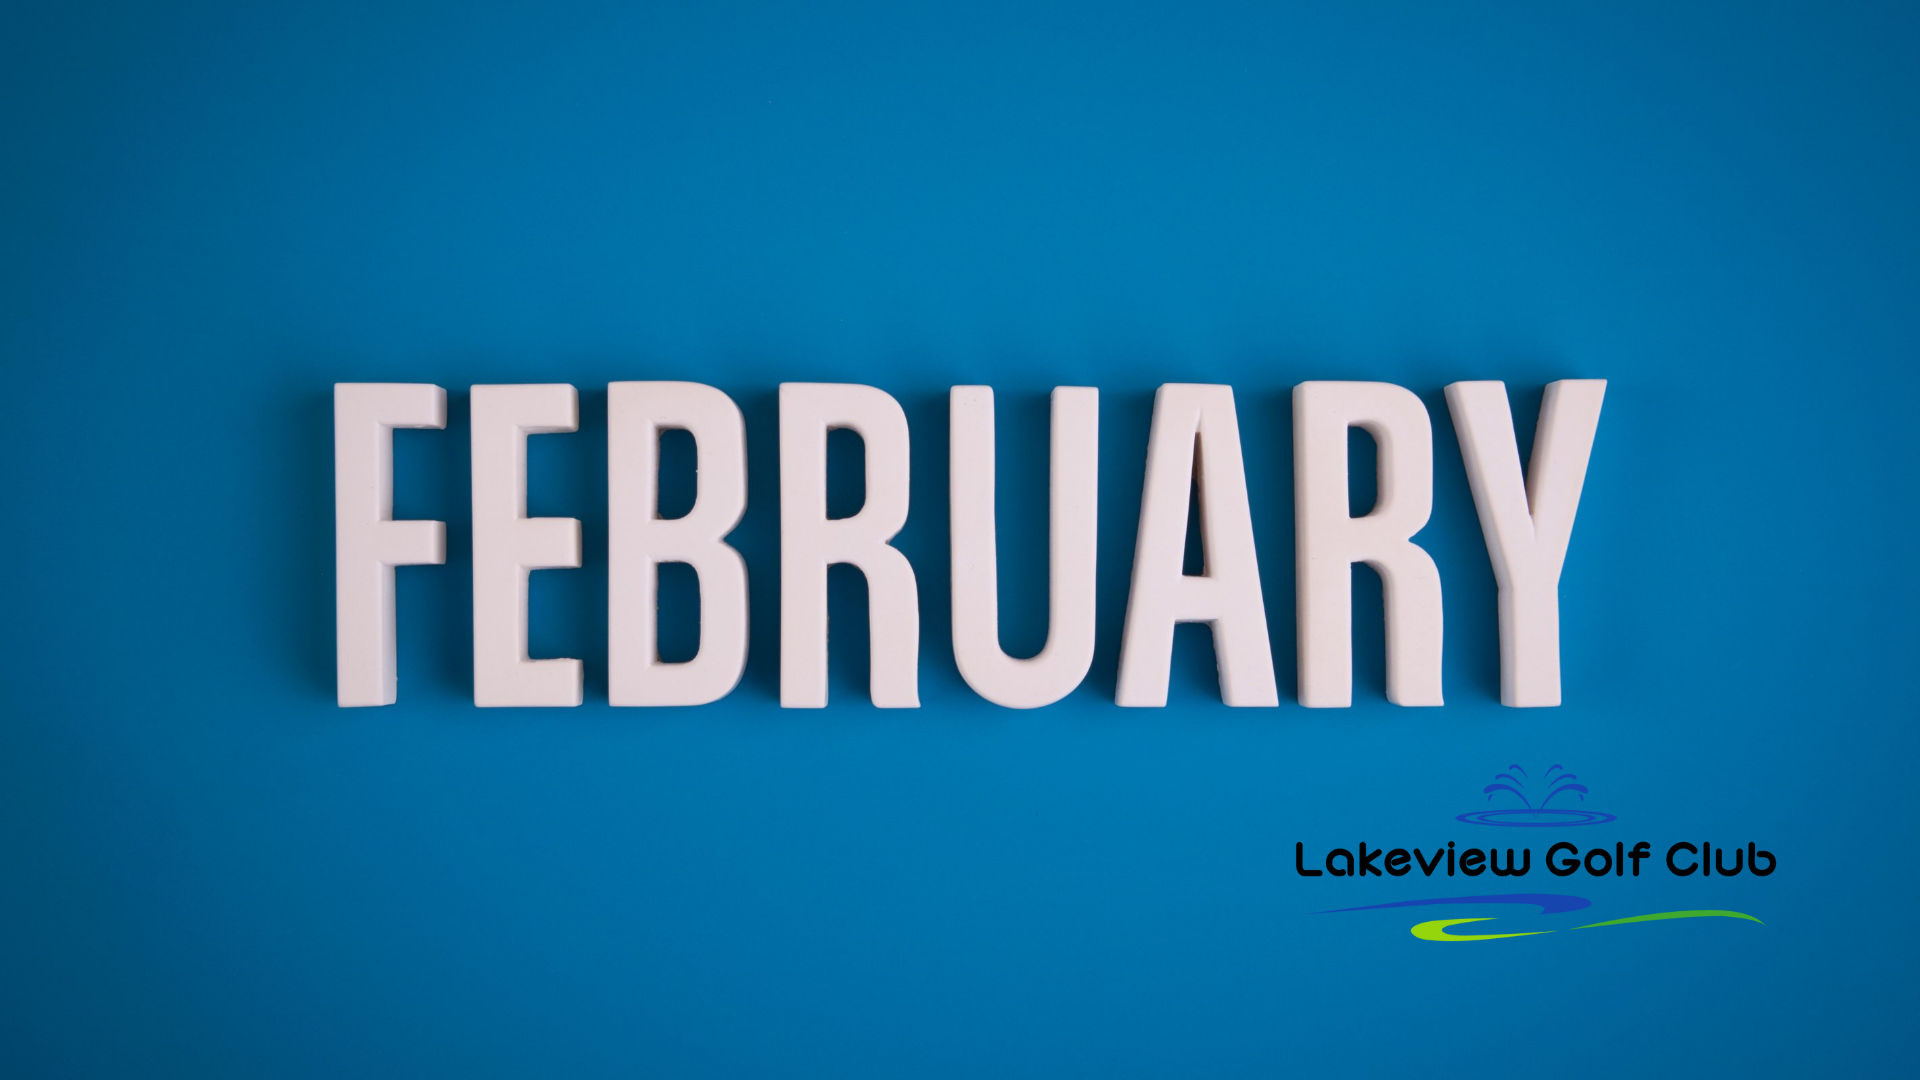 February at Lakeview